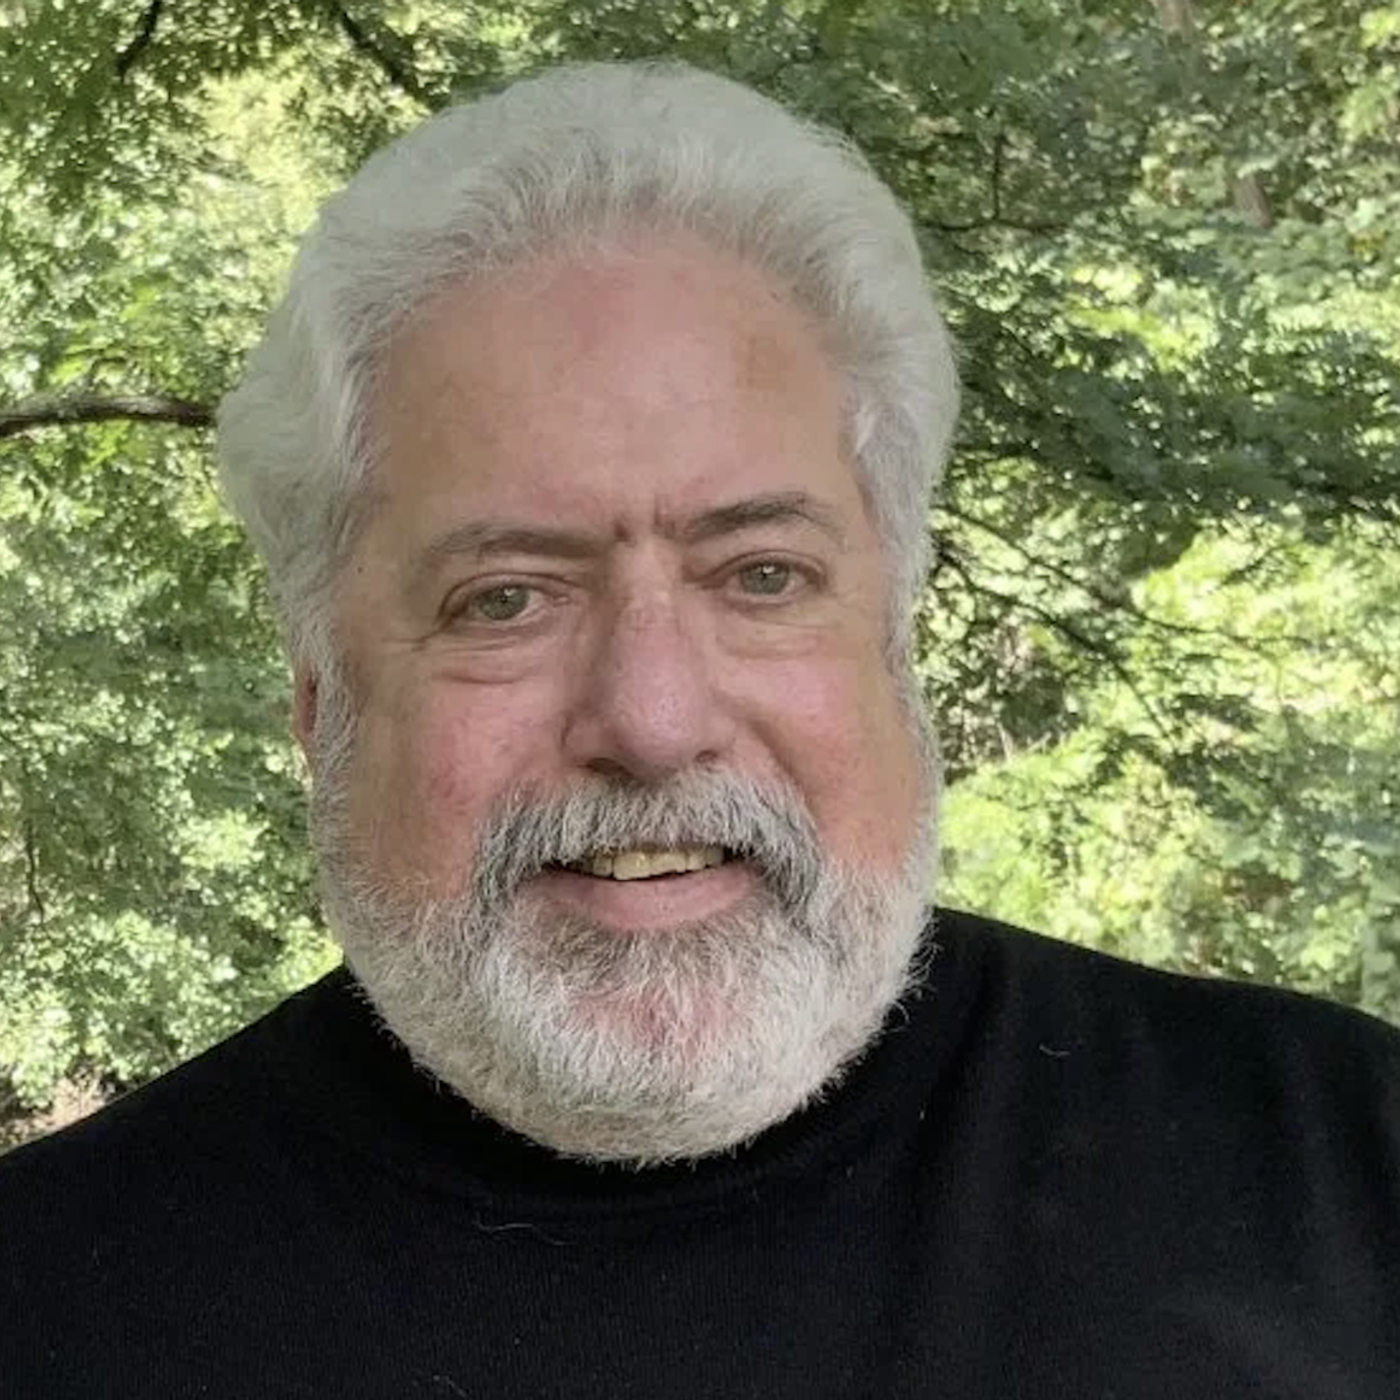 Lee Abrams - Founder and Chief Programmer XM Satellite Radio, Created the FM Rock format